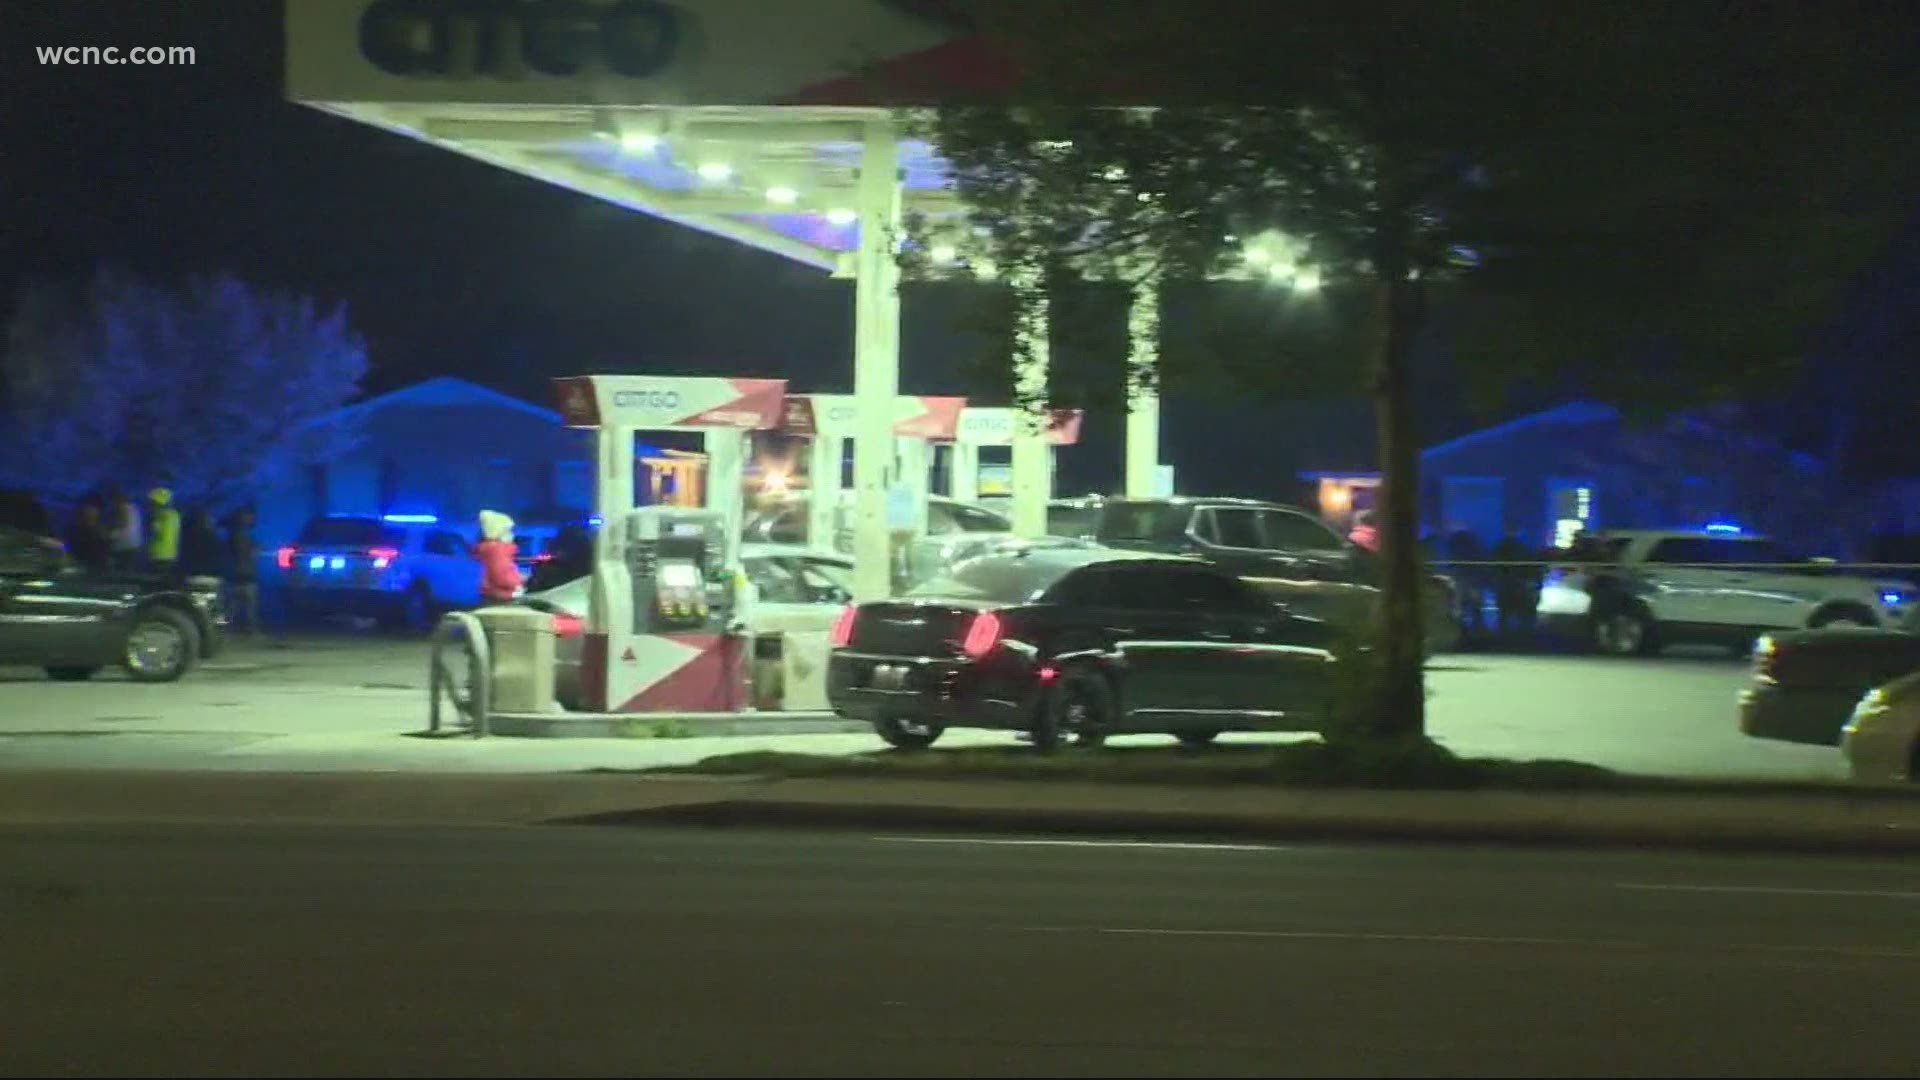 One person was killed in a shooting at a Citgo gas station on Beatties Ford Road in north Charlotte Wednesday night, Charlotte-Mecklenburg Police said.